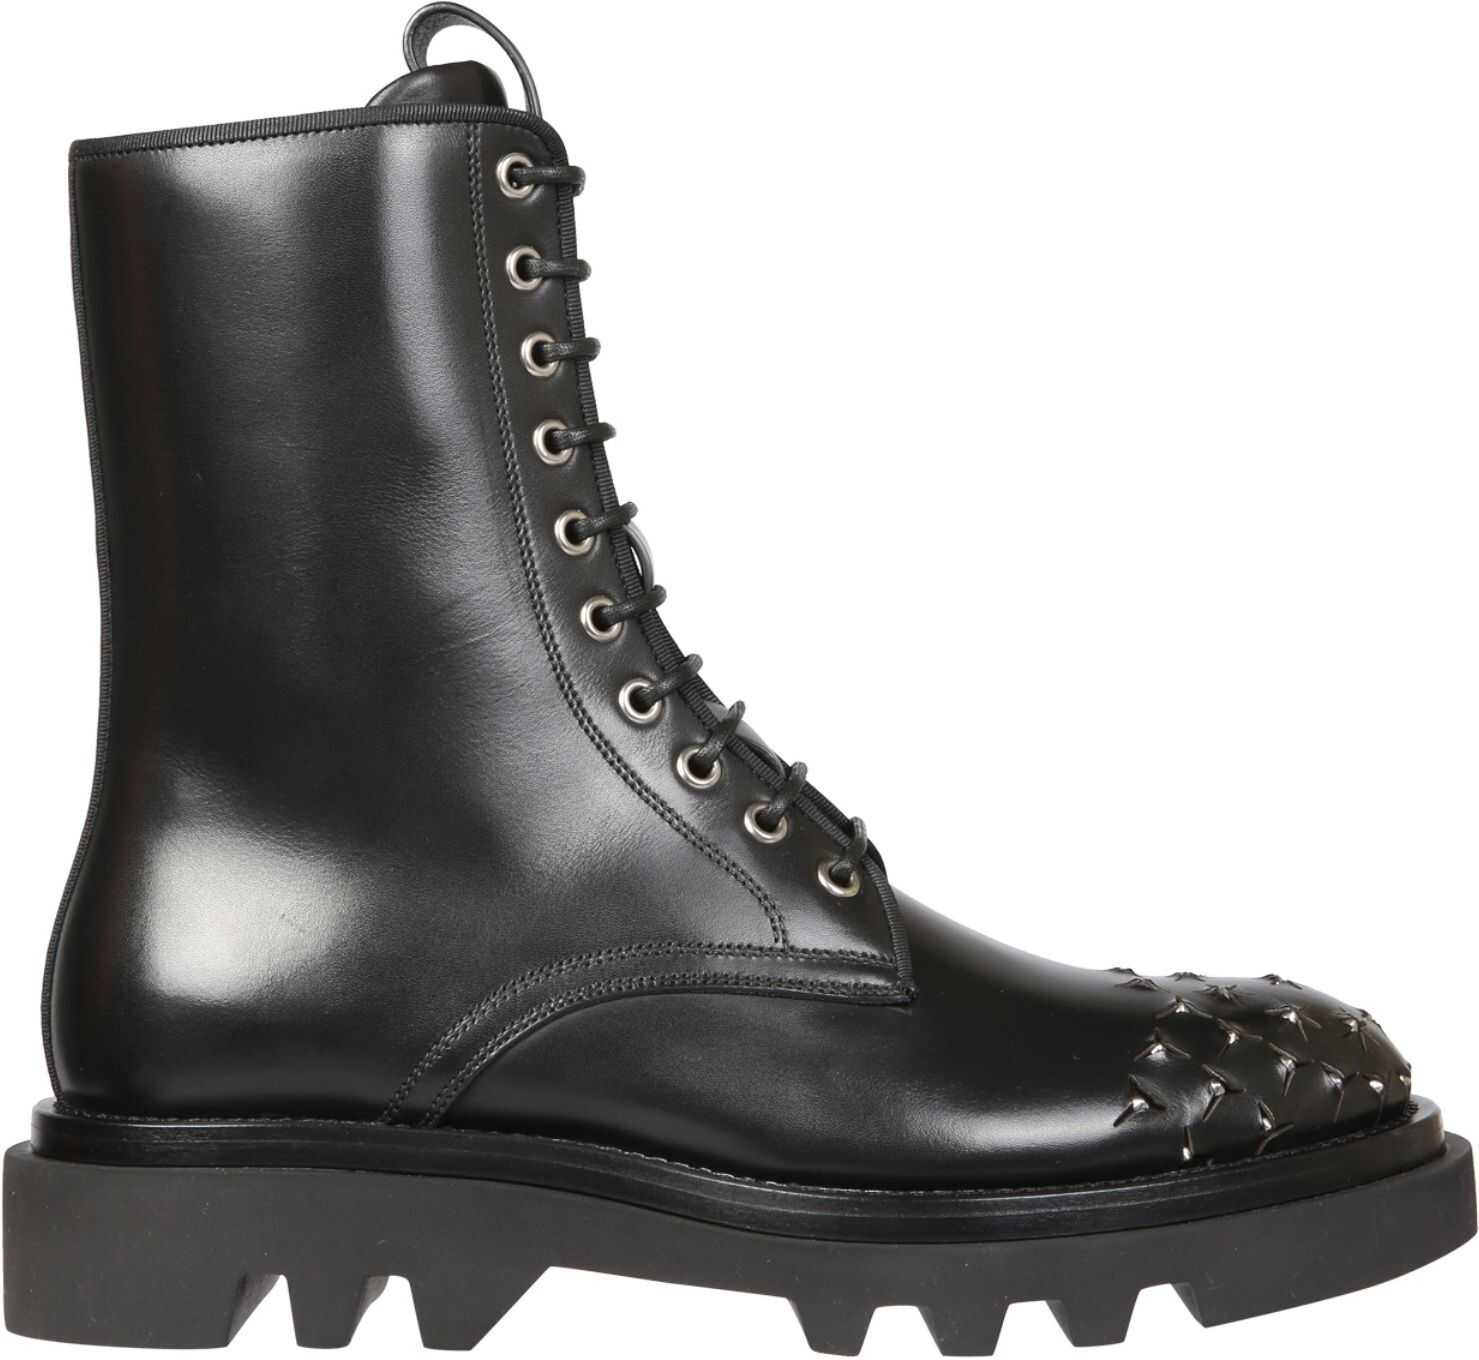 Givenchy Combat Boots With Studs BH6027H0KF_001 BLACK